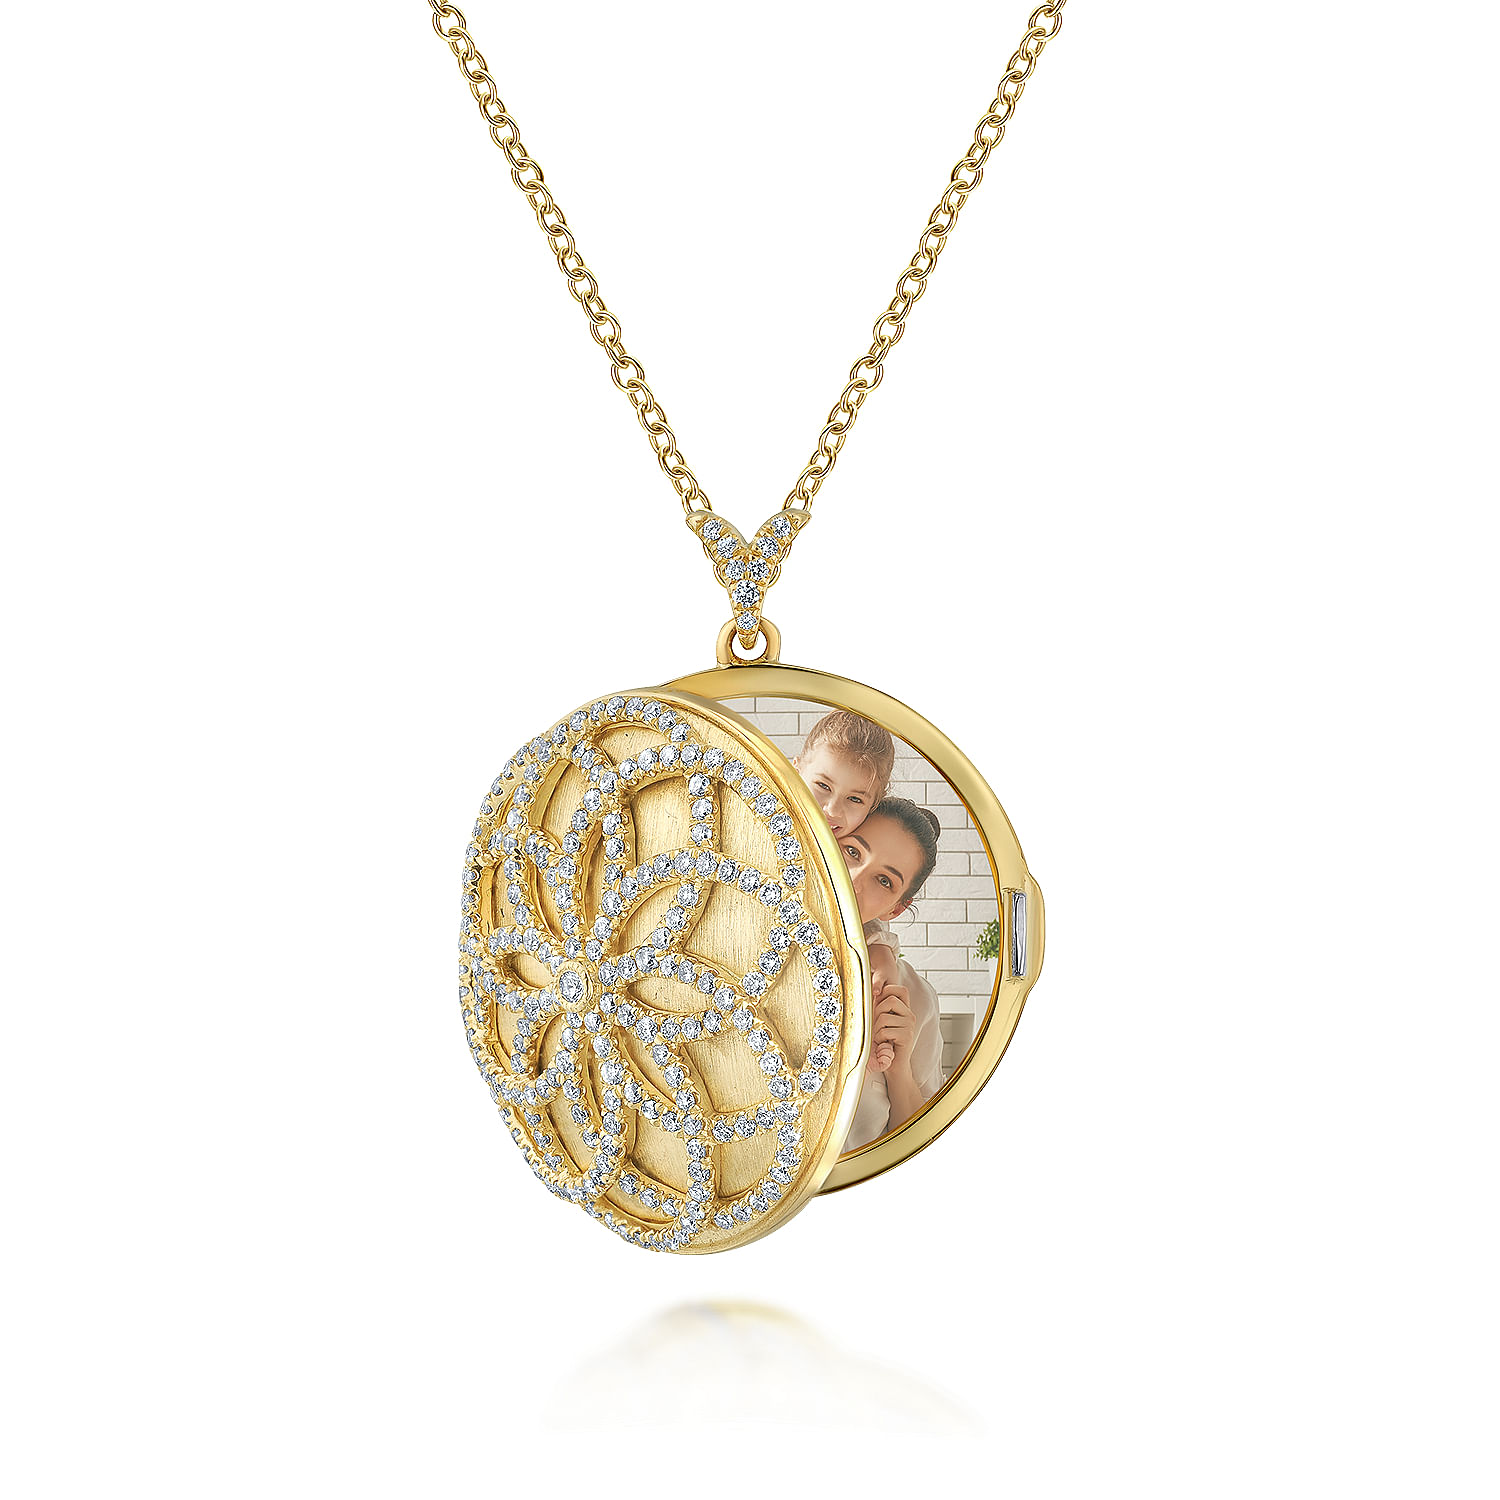 25 inch 14K Yellow Gold Locket Necklace with Floral Diamond Overlay